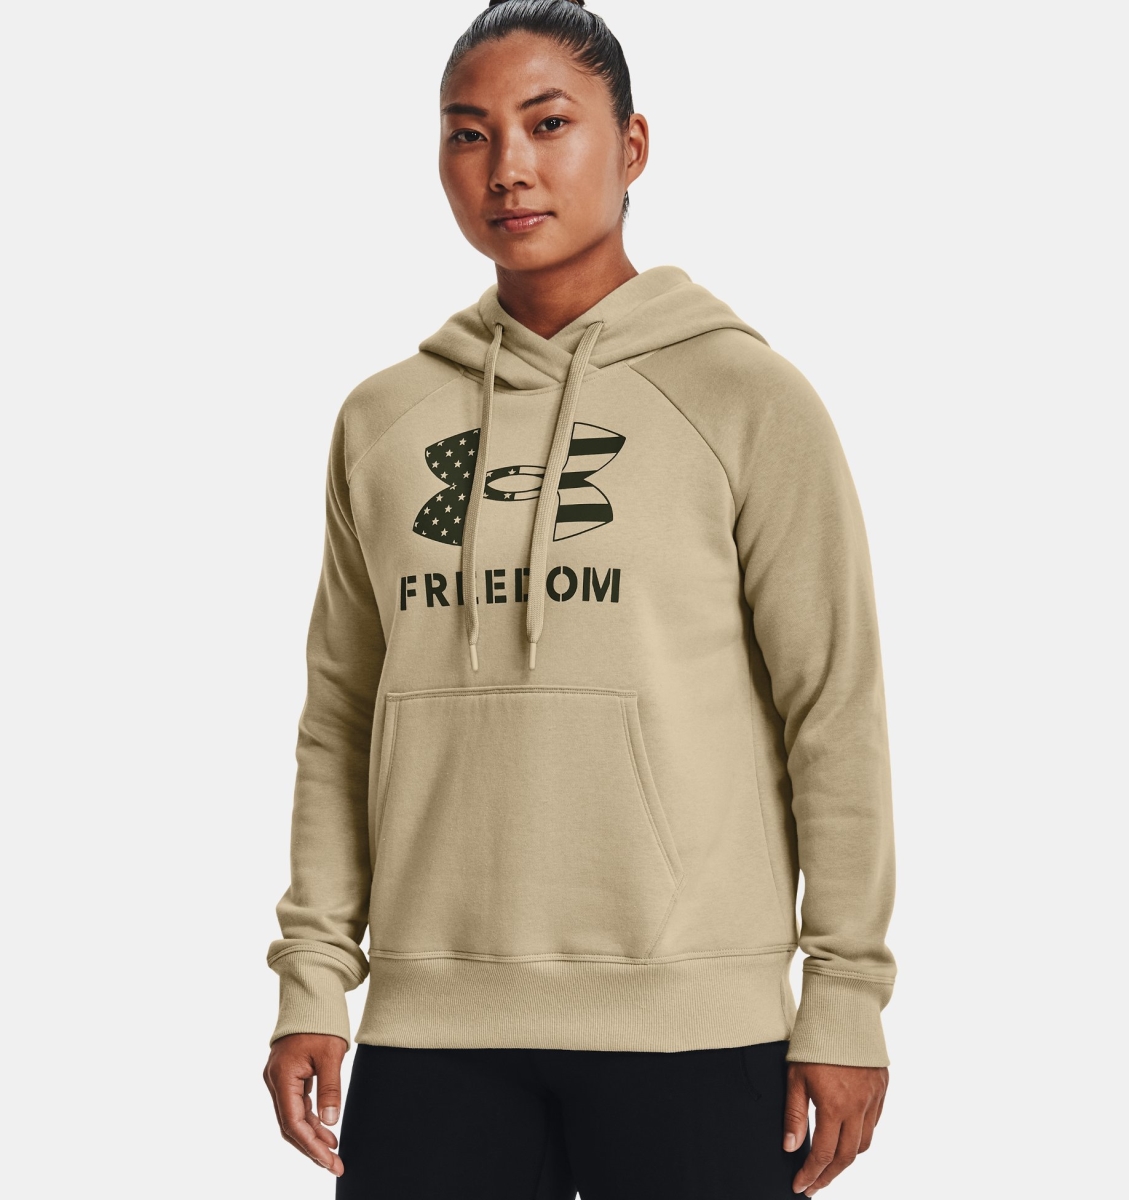 Under Armour 1370026290XS Womens Freedom Rival Hoodie, Desert Sand & Marine OD Green - Extra Small -  Inner Armour